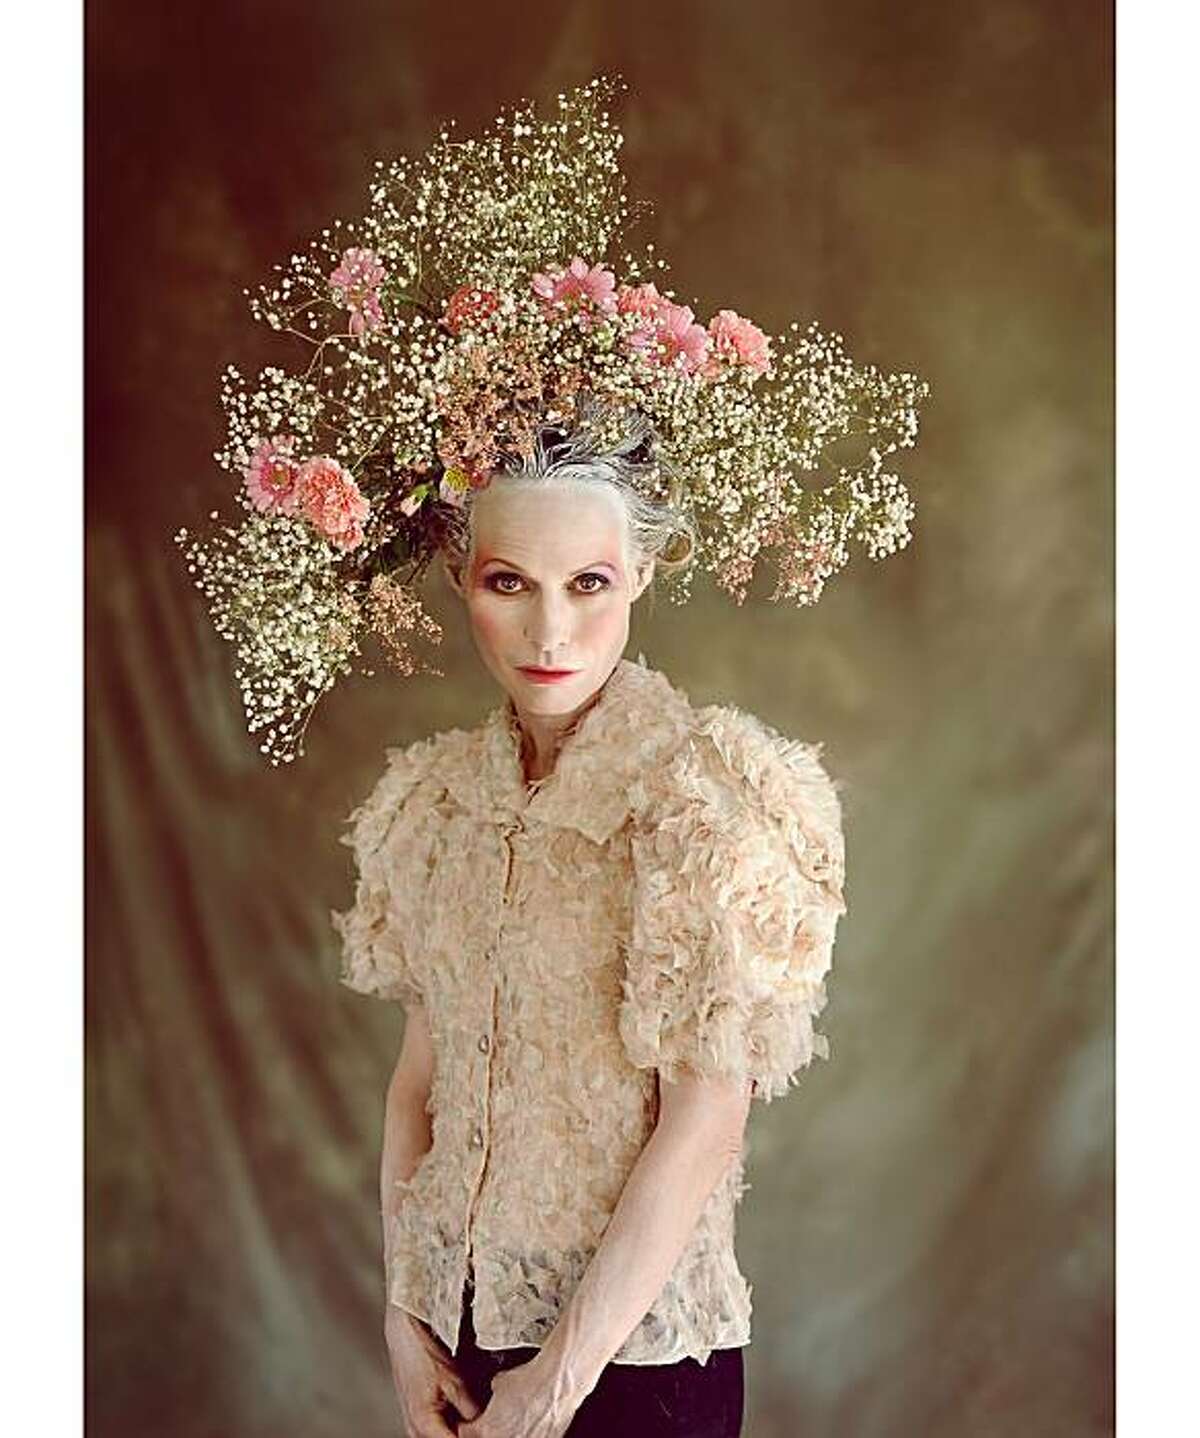 London photographer Frederic Aranda, who specializes in portrait photography, did a fantasy fashion series with San Francisco arts patron Christine Suppes in London during June, 2010. The series was called "Four Seasons" and this piece is is titled "Spring."